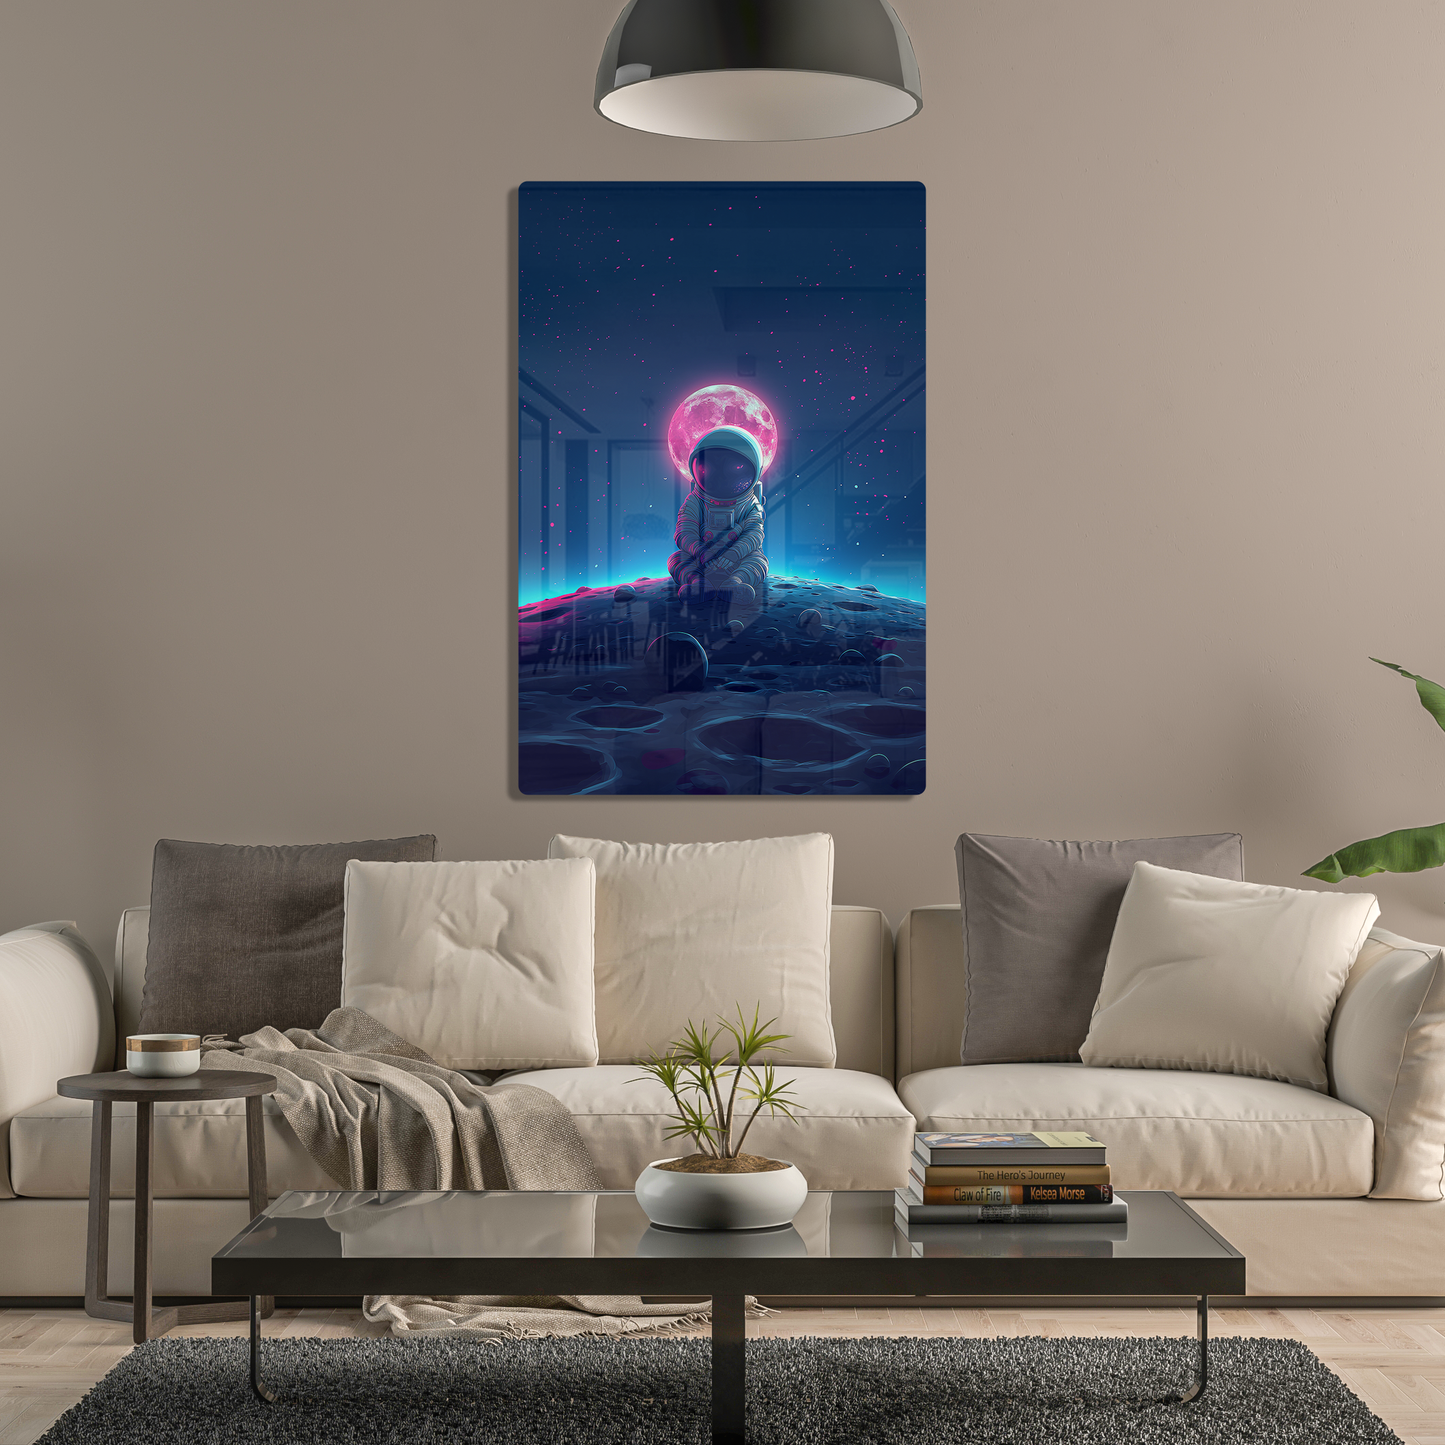 Cosmic Contemplation (Acrylic)Step into the universe with an astronaut in deep thought on the lunar surface under a glowing moon. Acrylic art from RimaGallery. Experience the cosmos in your home RimaGallery